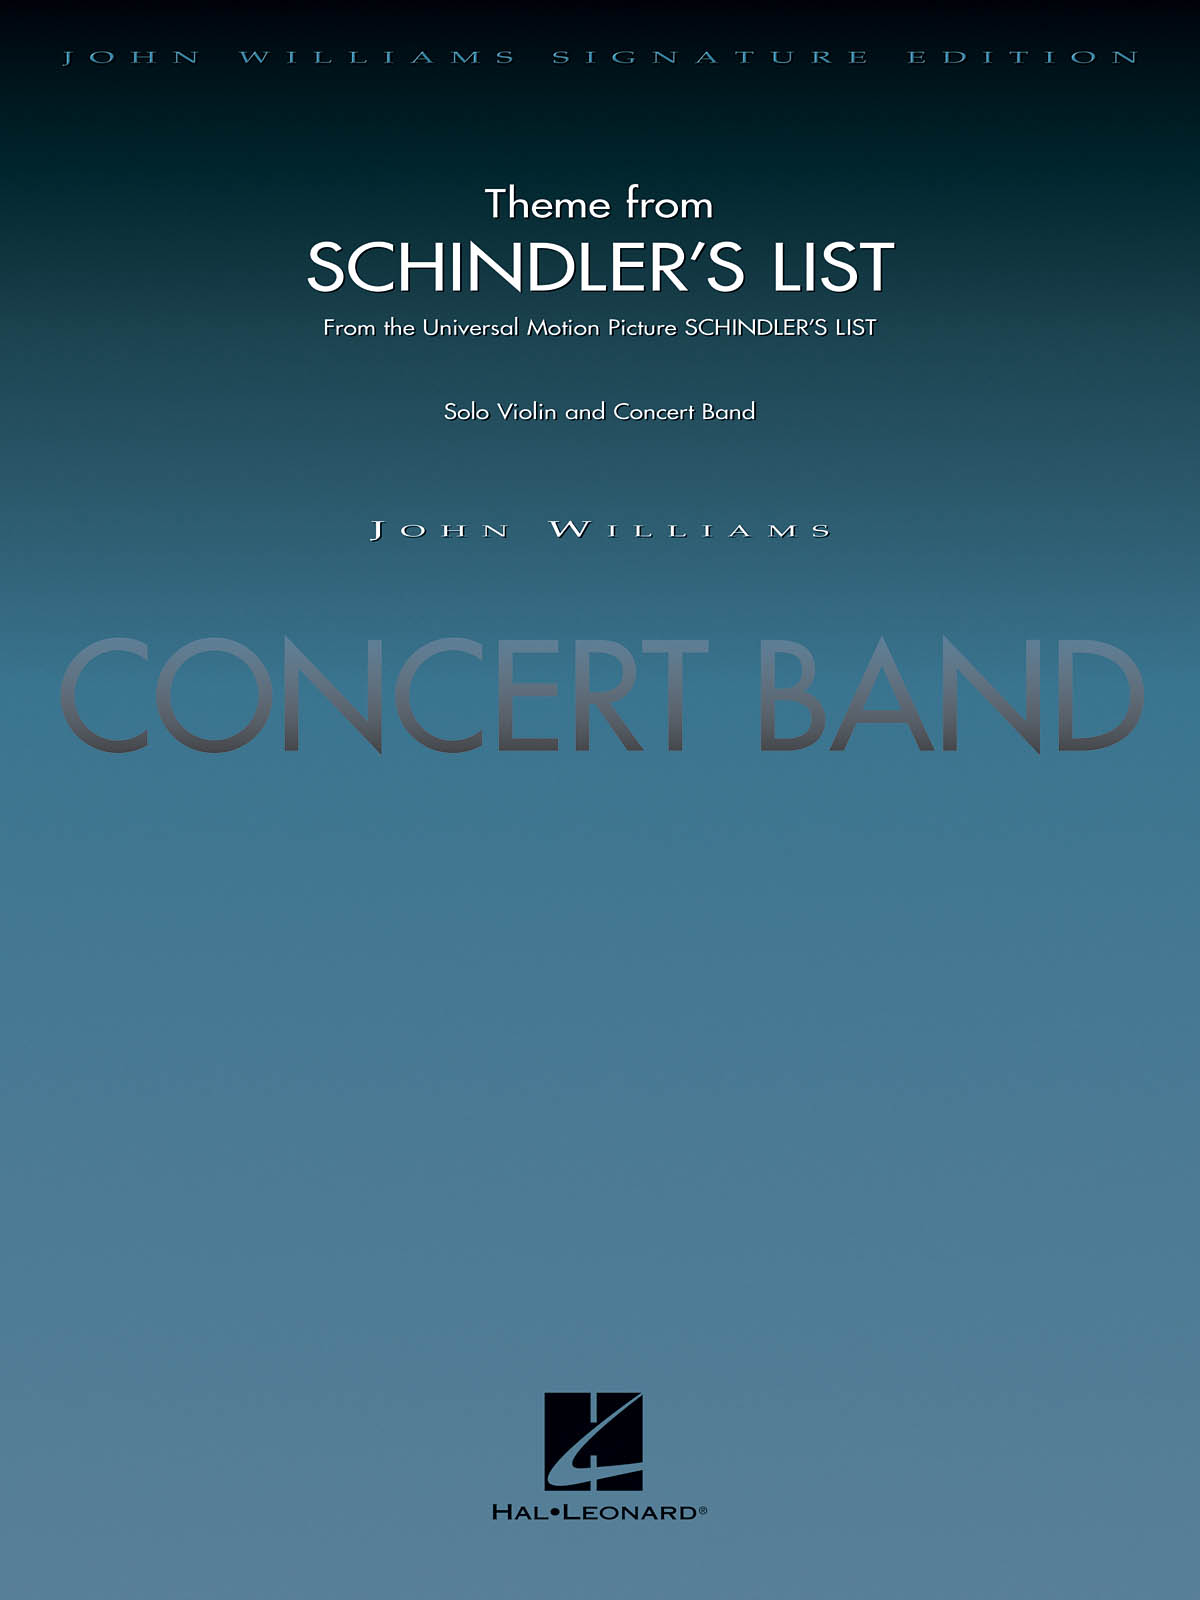 John Williams: Theme from Schindler's List: Concert Band: Score & Parts